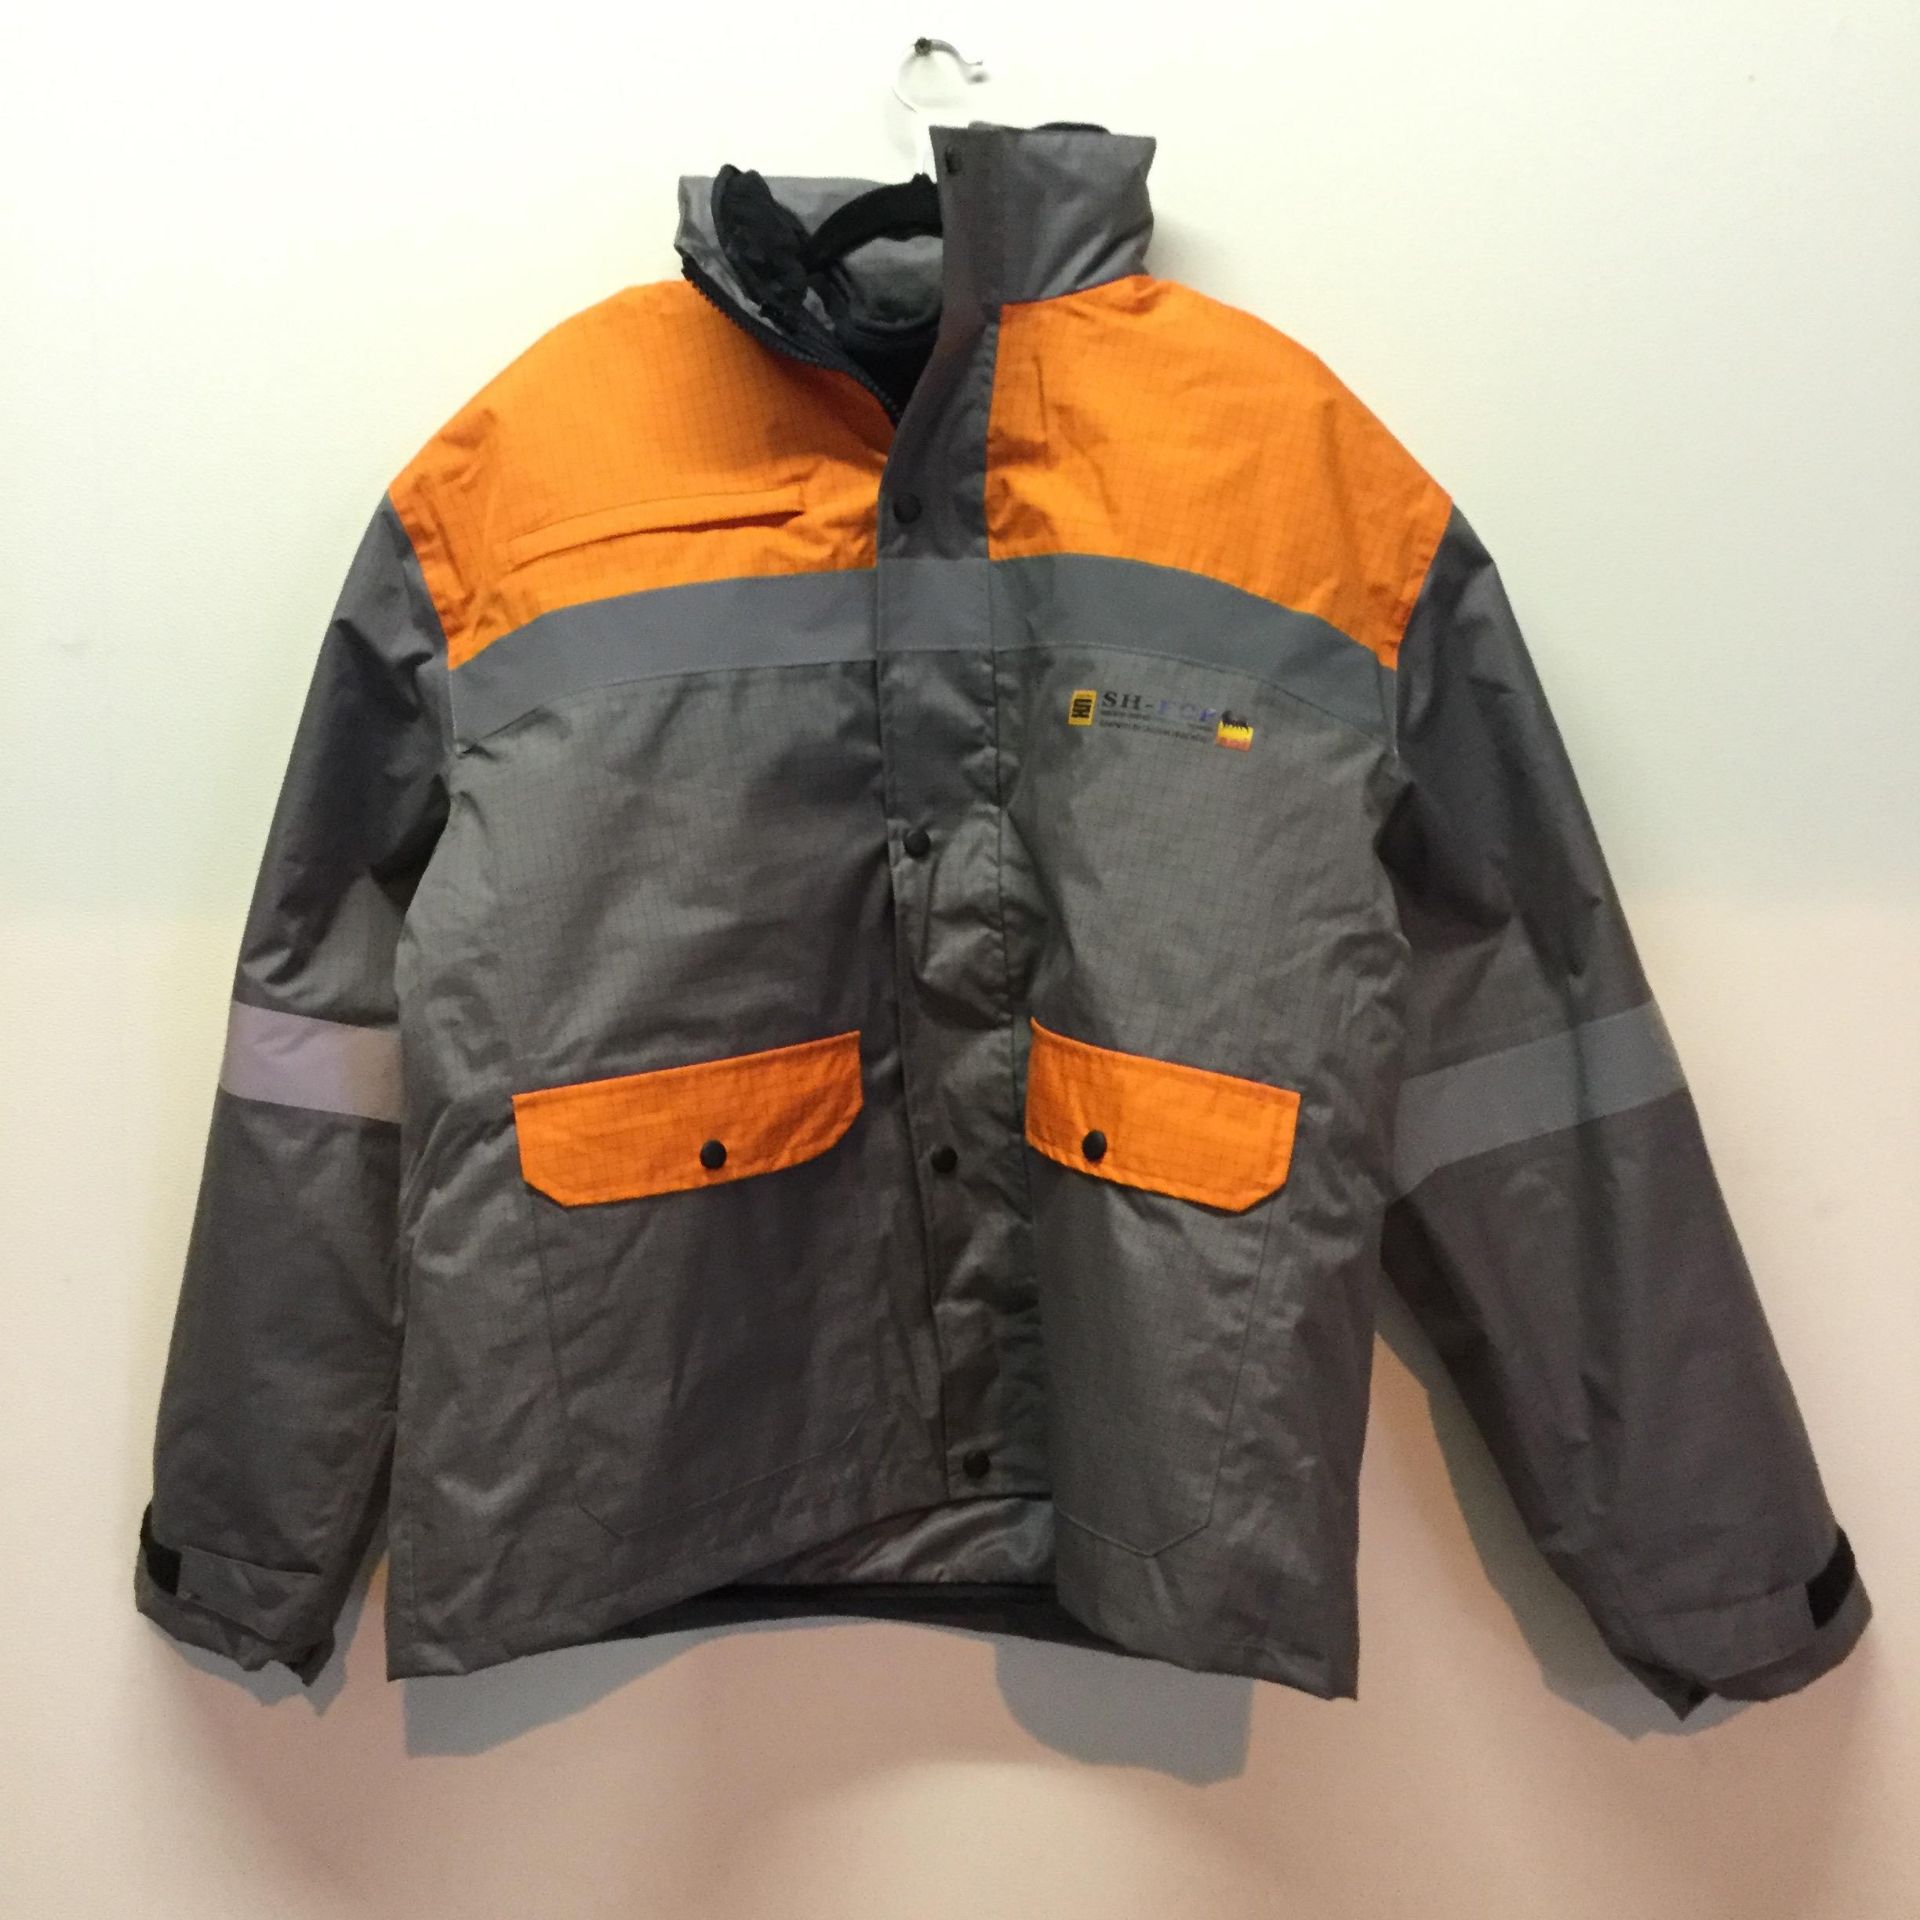 All Weather 3 layer Gortex Antistatic waterproof Jackets - Size 62